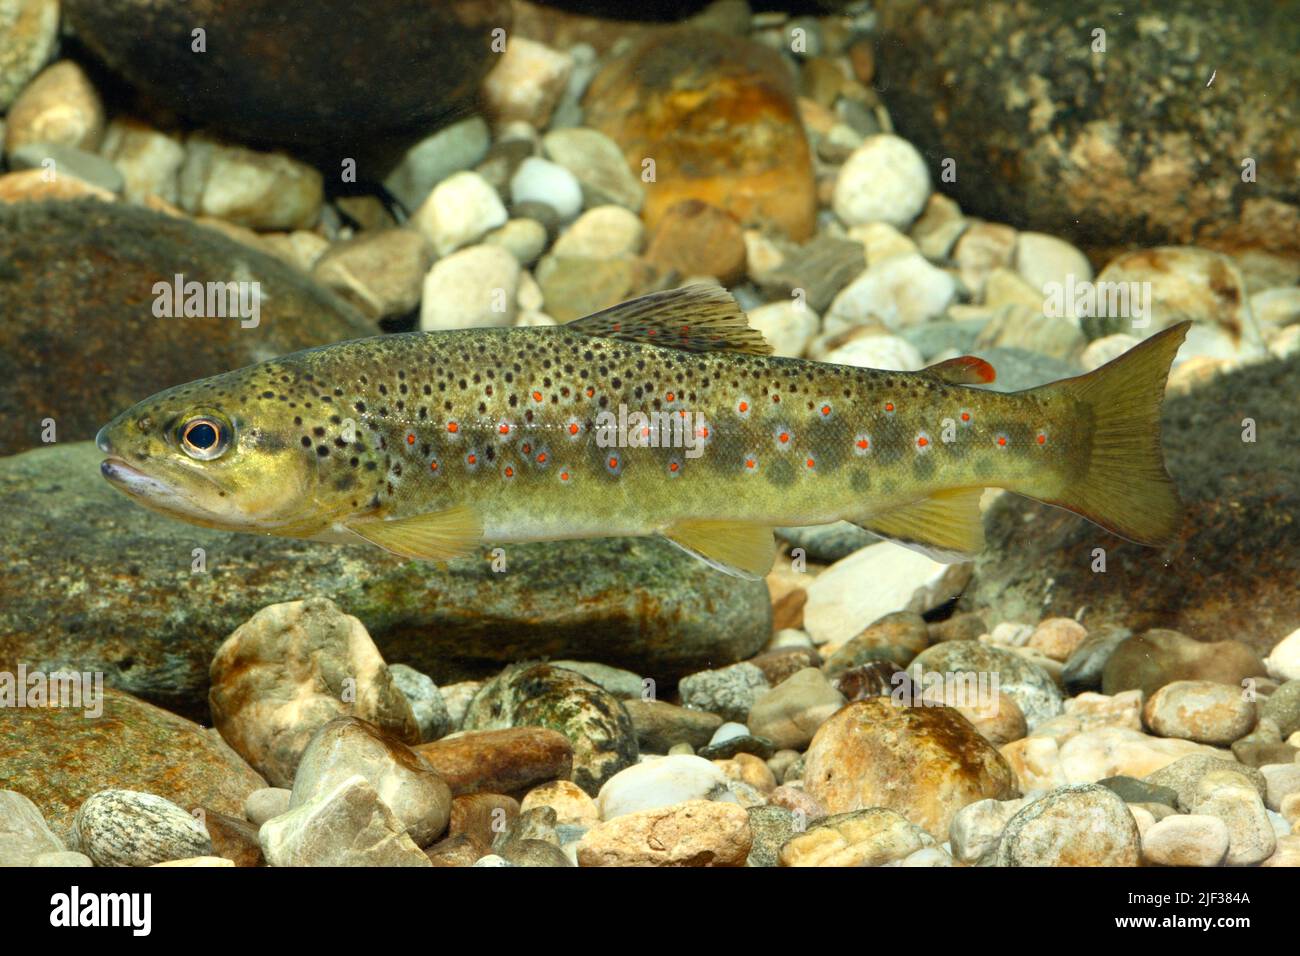 brown trout, river trout, brook trout (Salmo trutta fario), autochthone type from the Isen, Germany, Bavaria Stock Photo